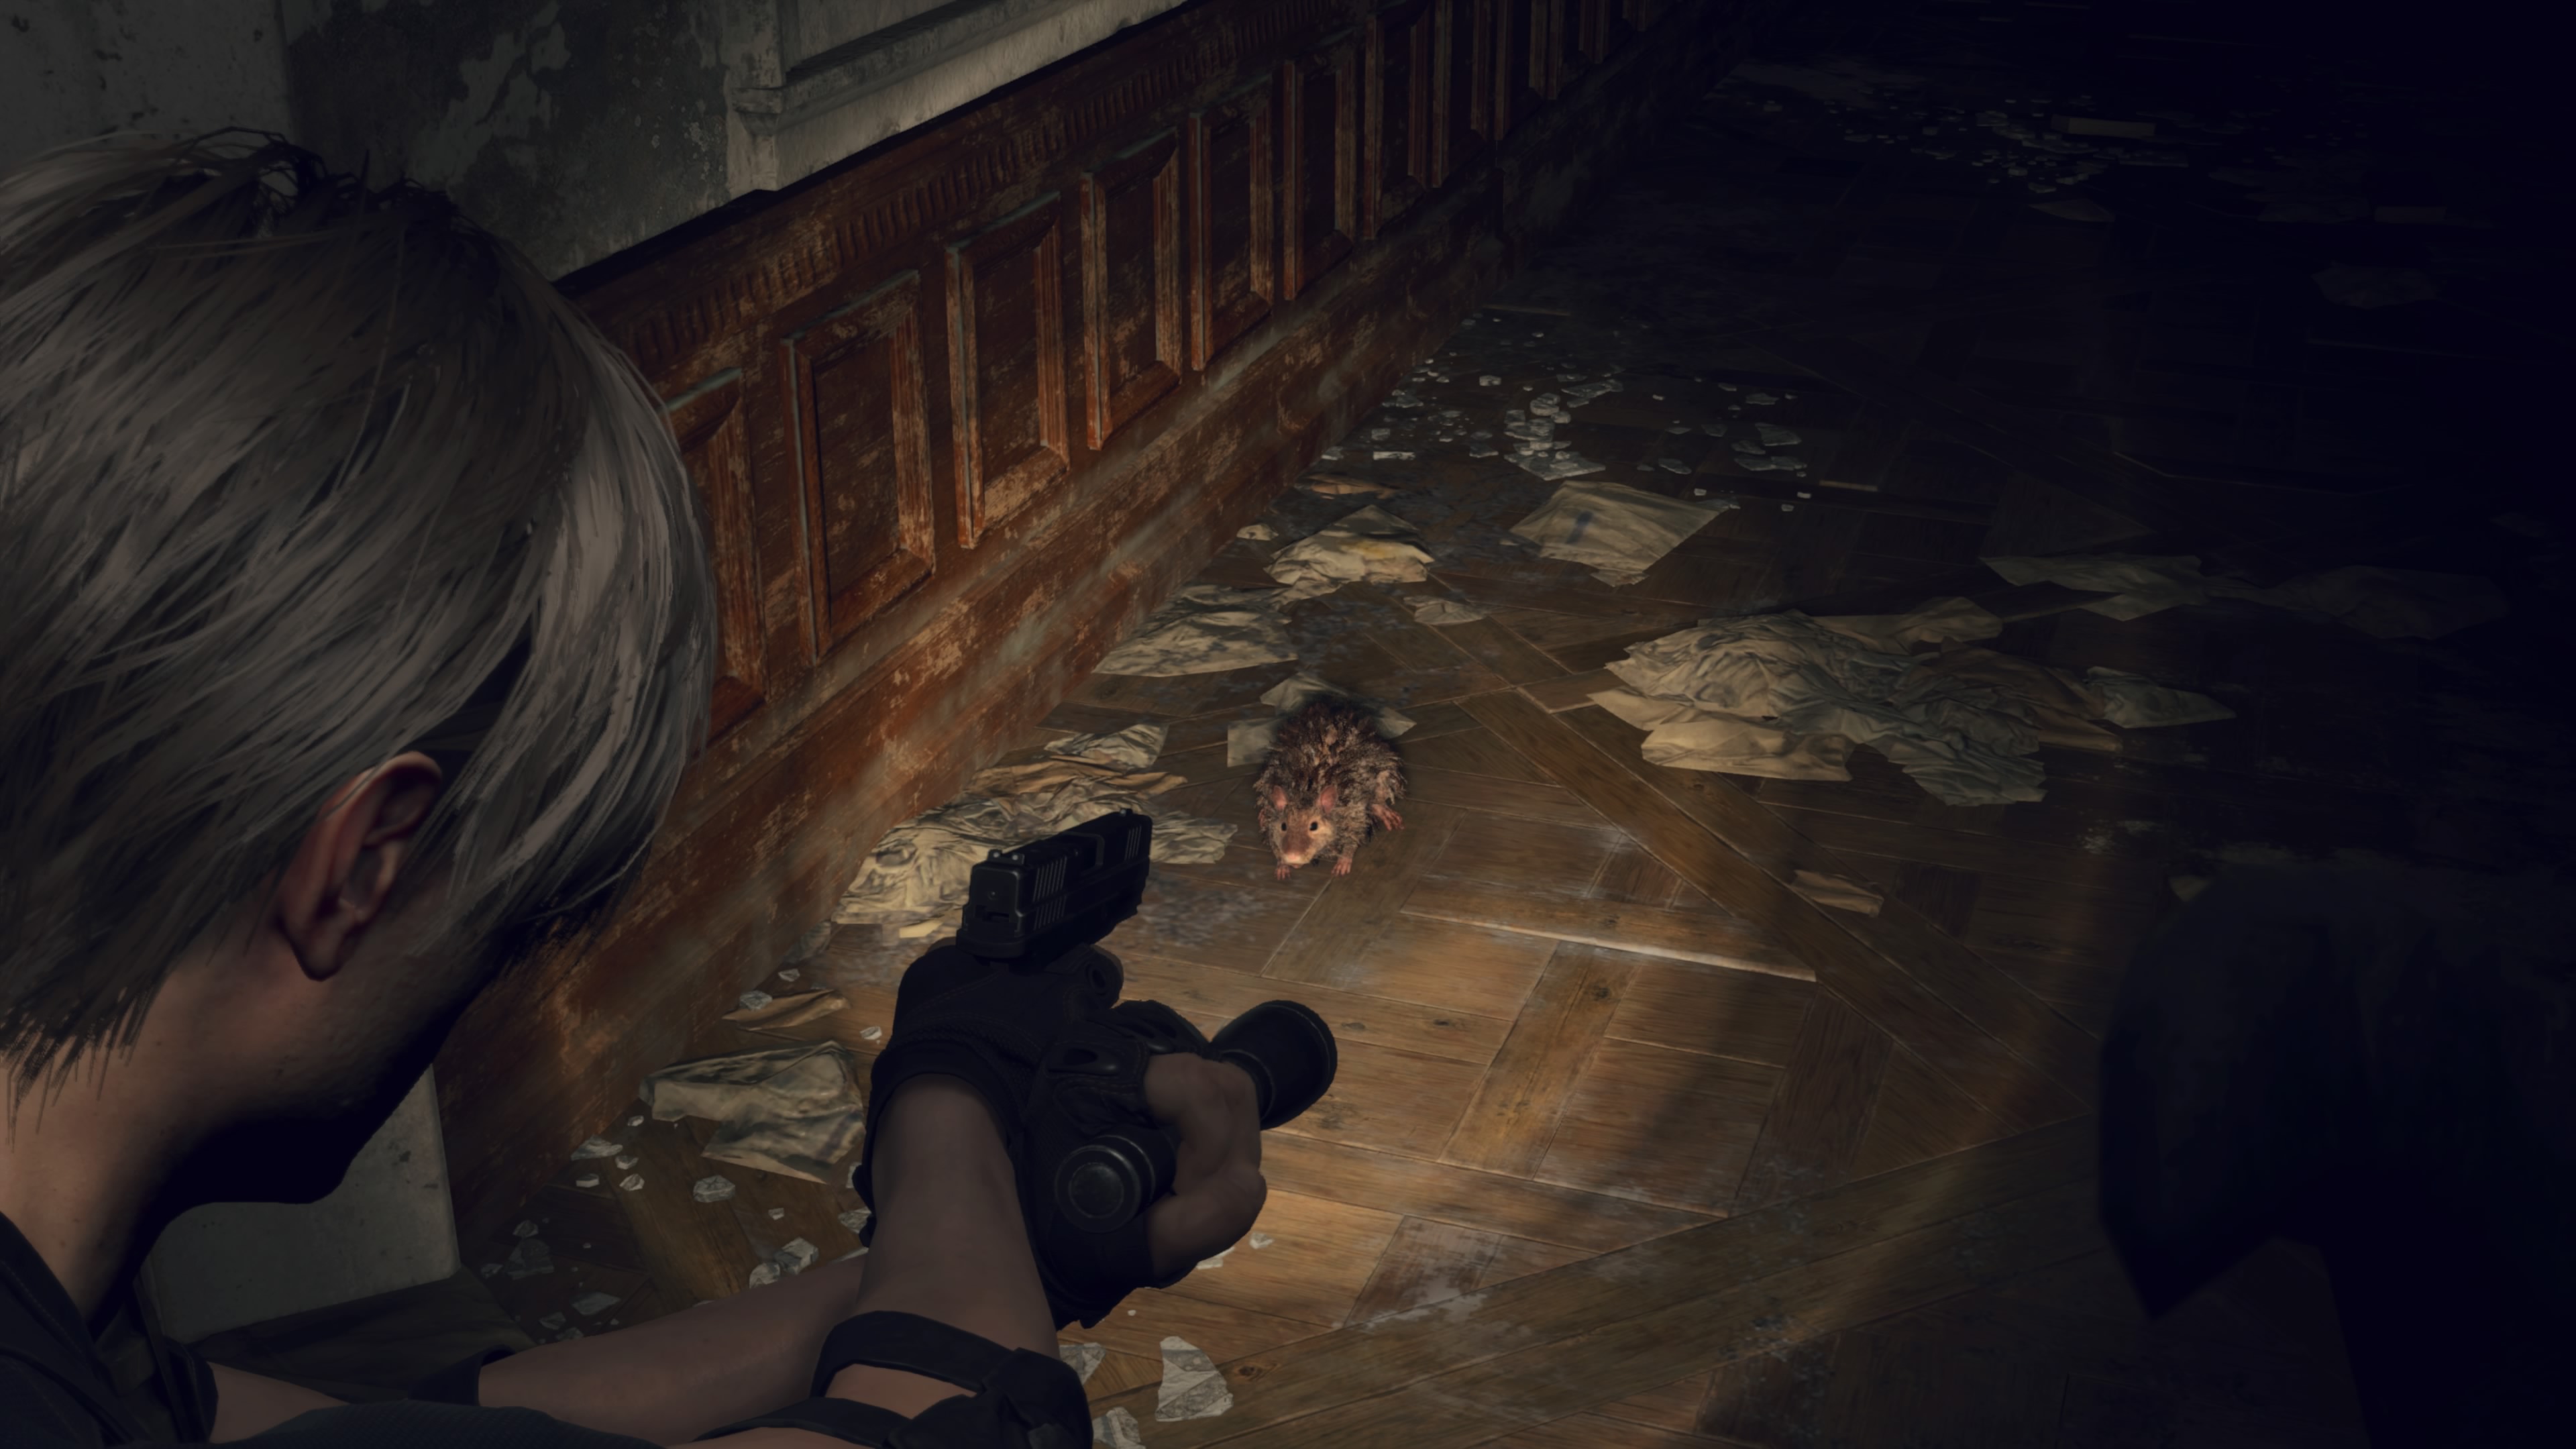 How to Exterminate All the Rats in the Grand Hall More Pest Control Mission in Resident Evil 4 Remake